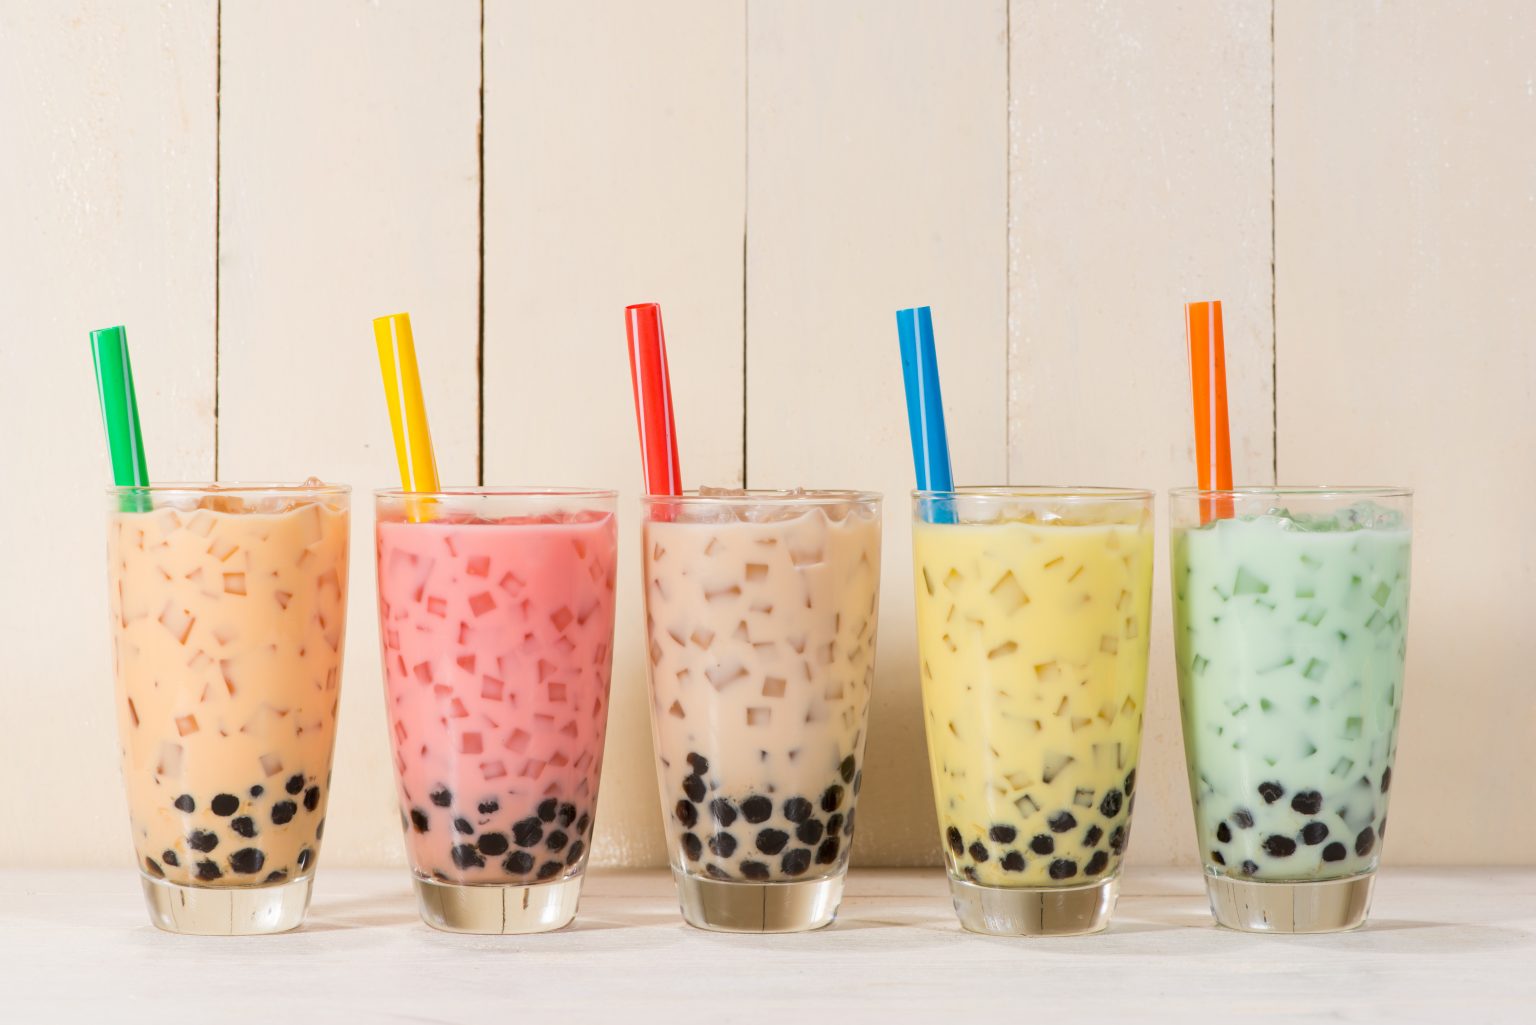 April 30th is National Bubble Tea Day! The Giant of Siam